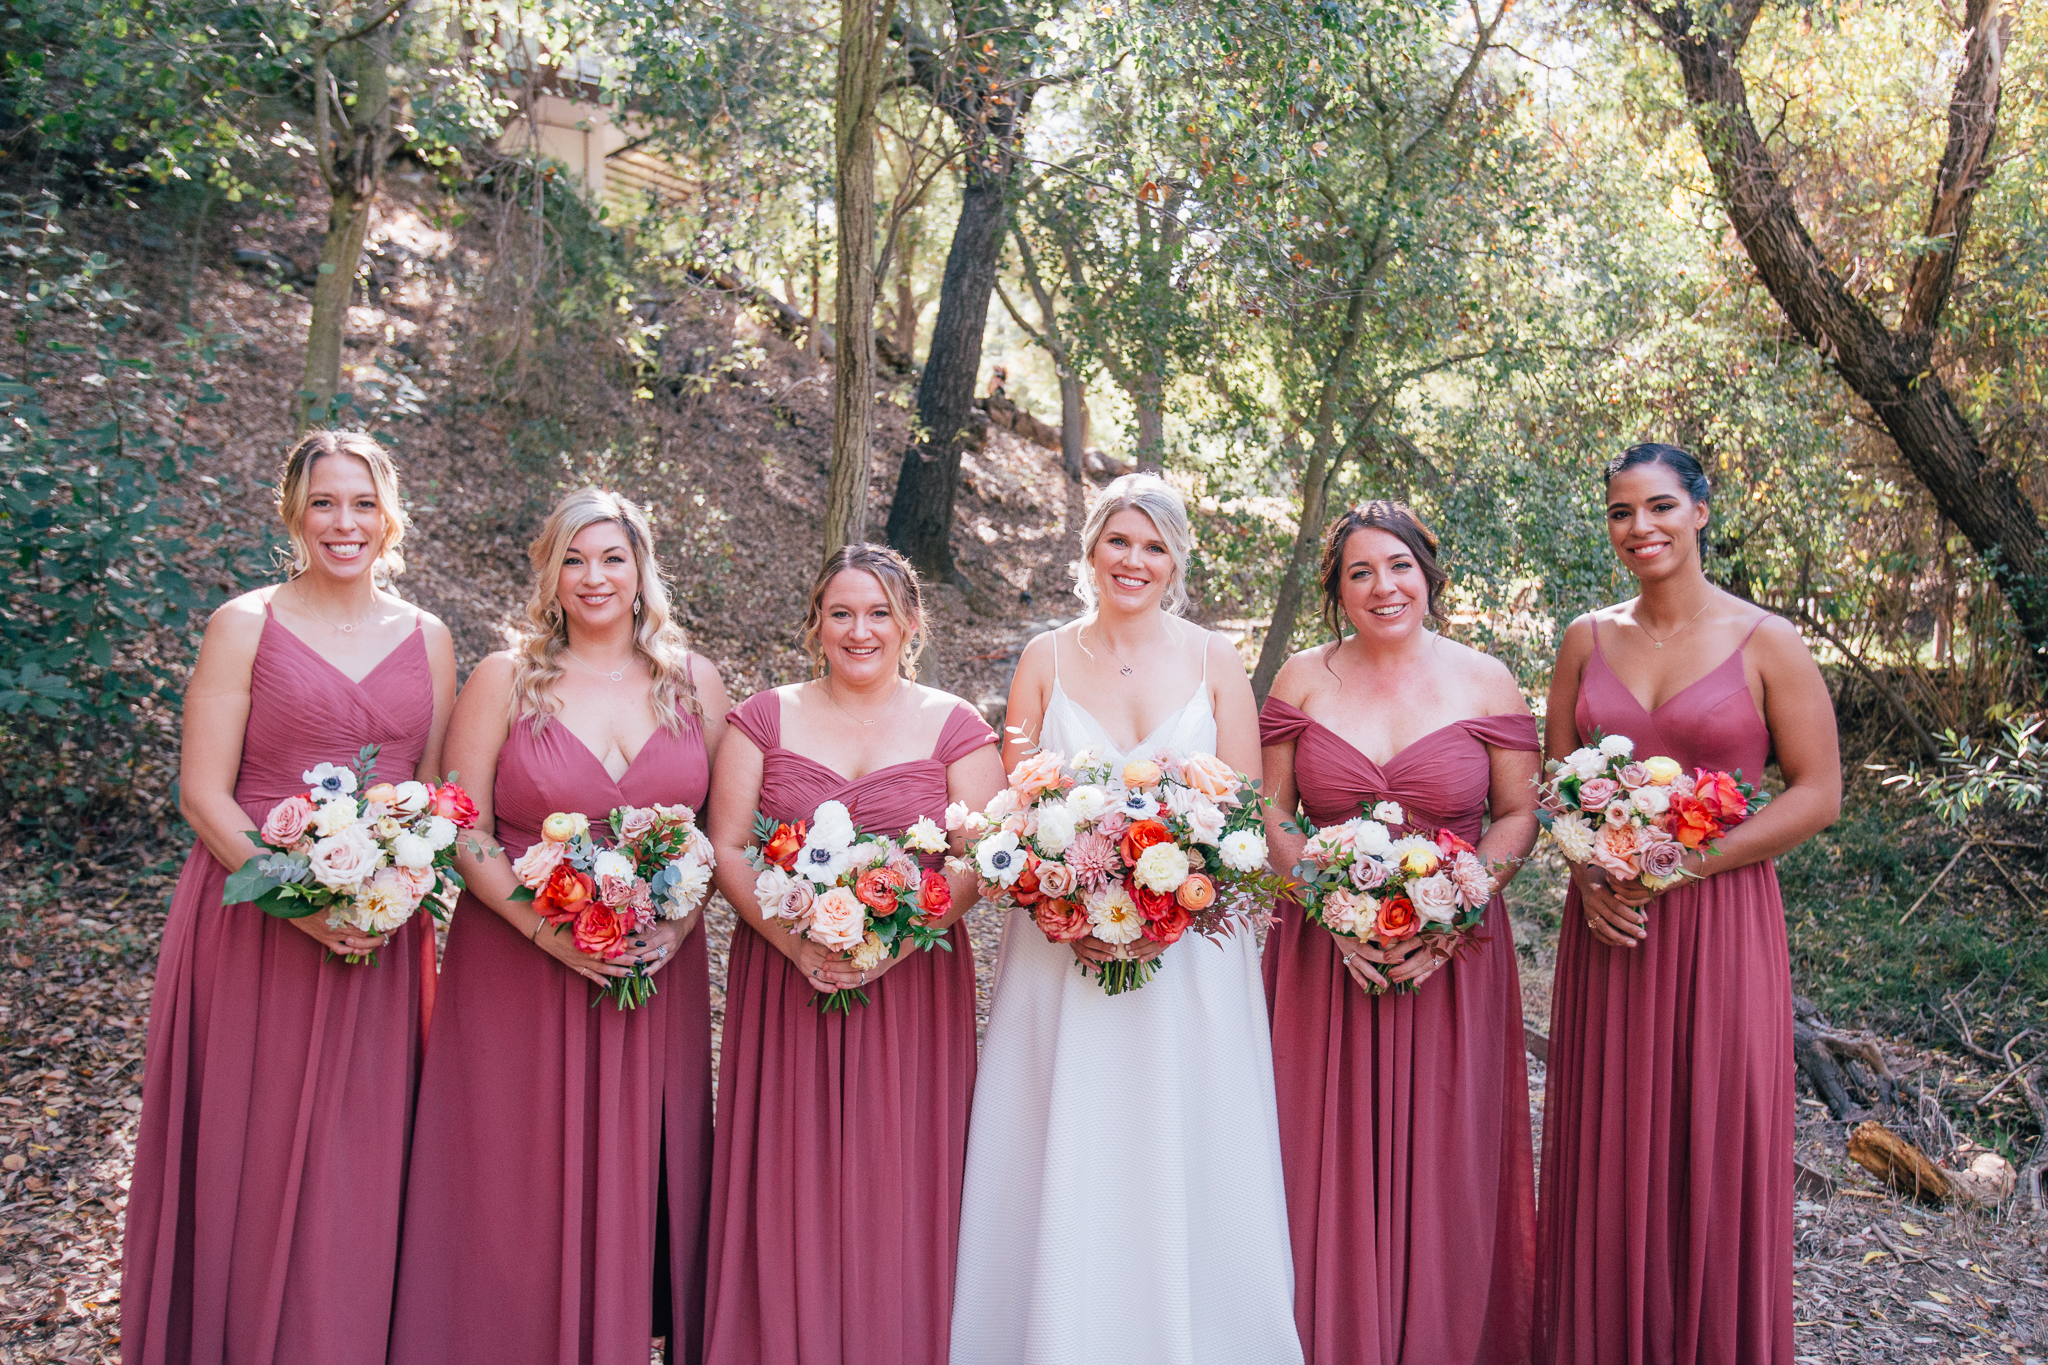 bride stands with bridesmaids in mauve dresses while holding bright and vibrant wedding bouquets